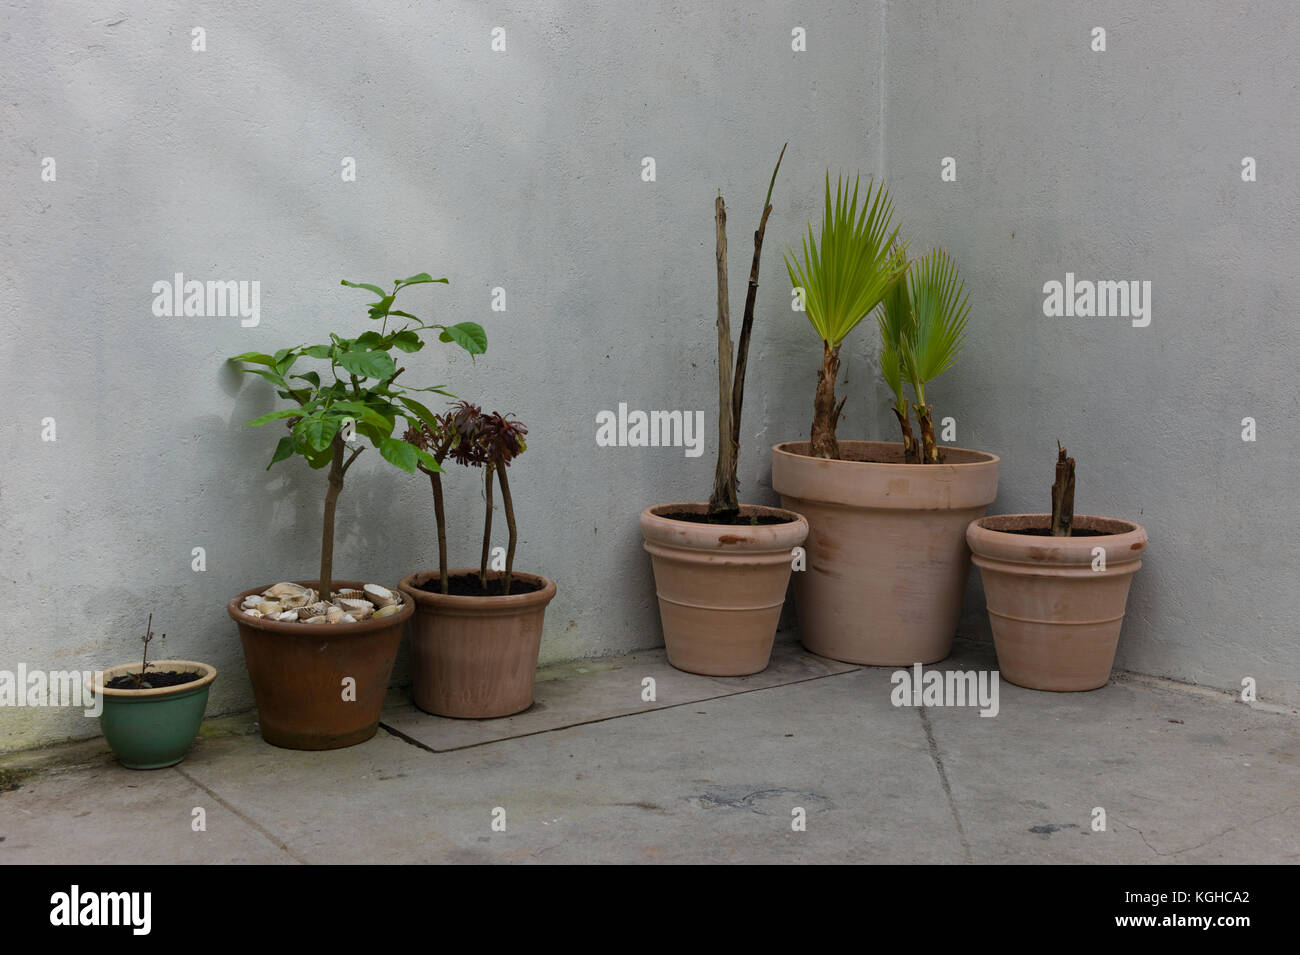 Plansts with a concrete background Stock Photo